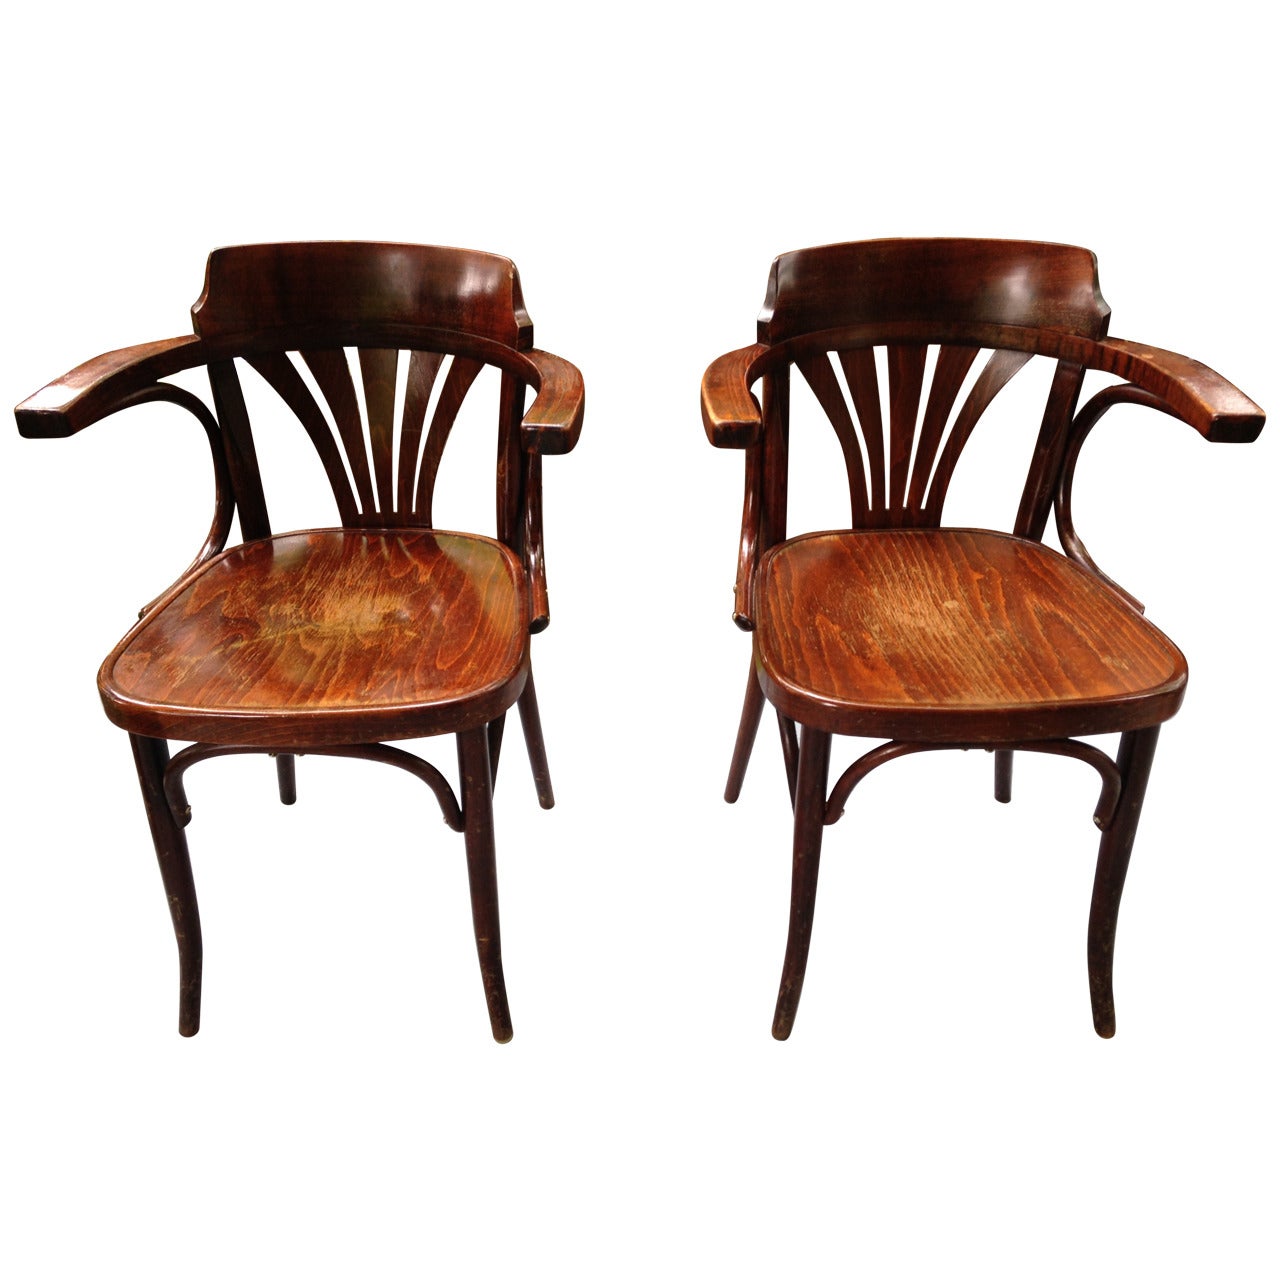 Pair of Thonet, Vienna-style Bentwood Dining Chairs ( 12 chairs available )